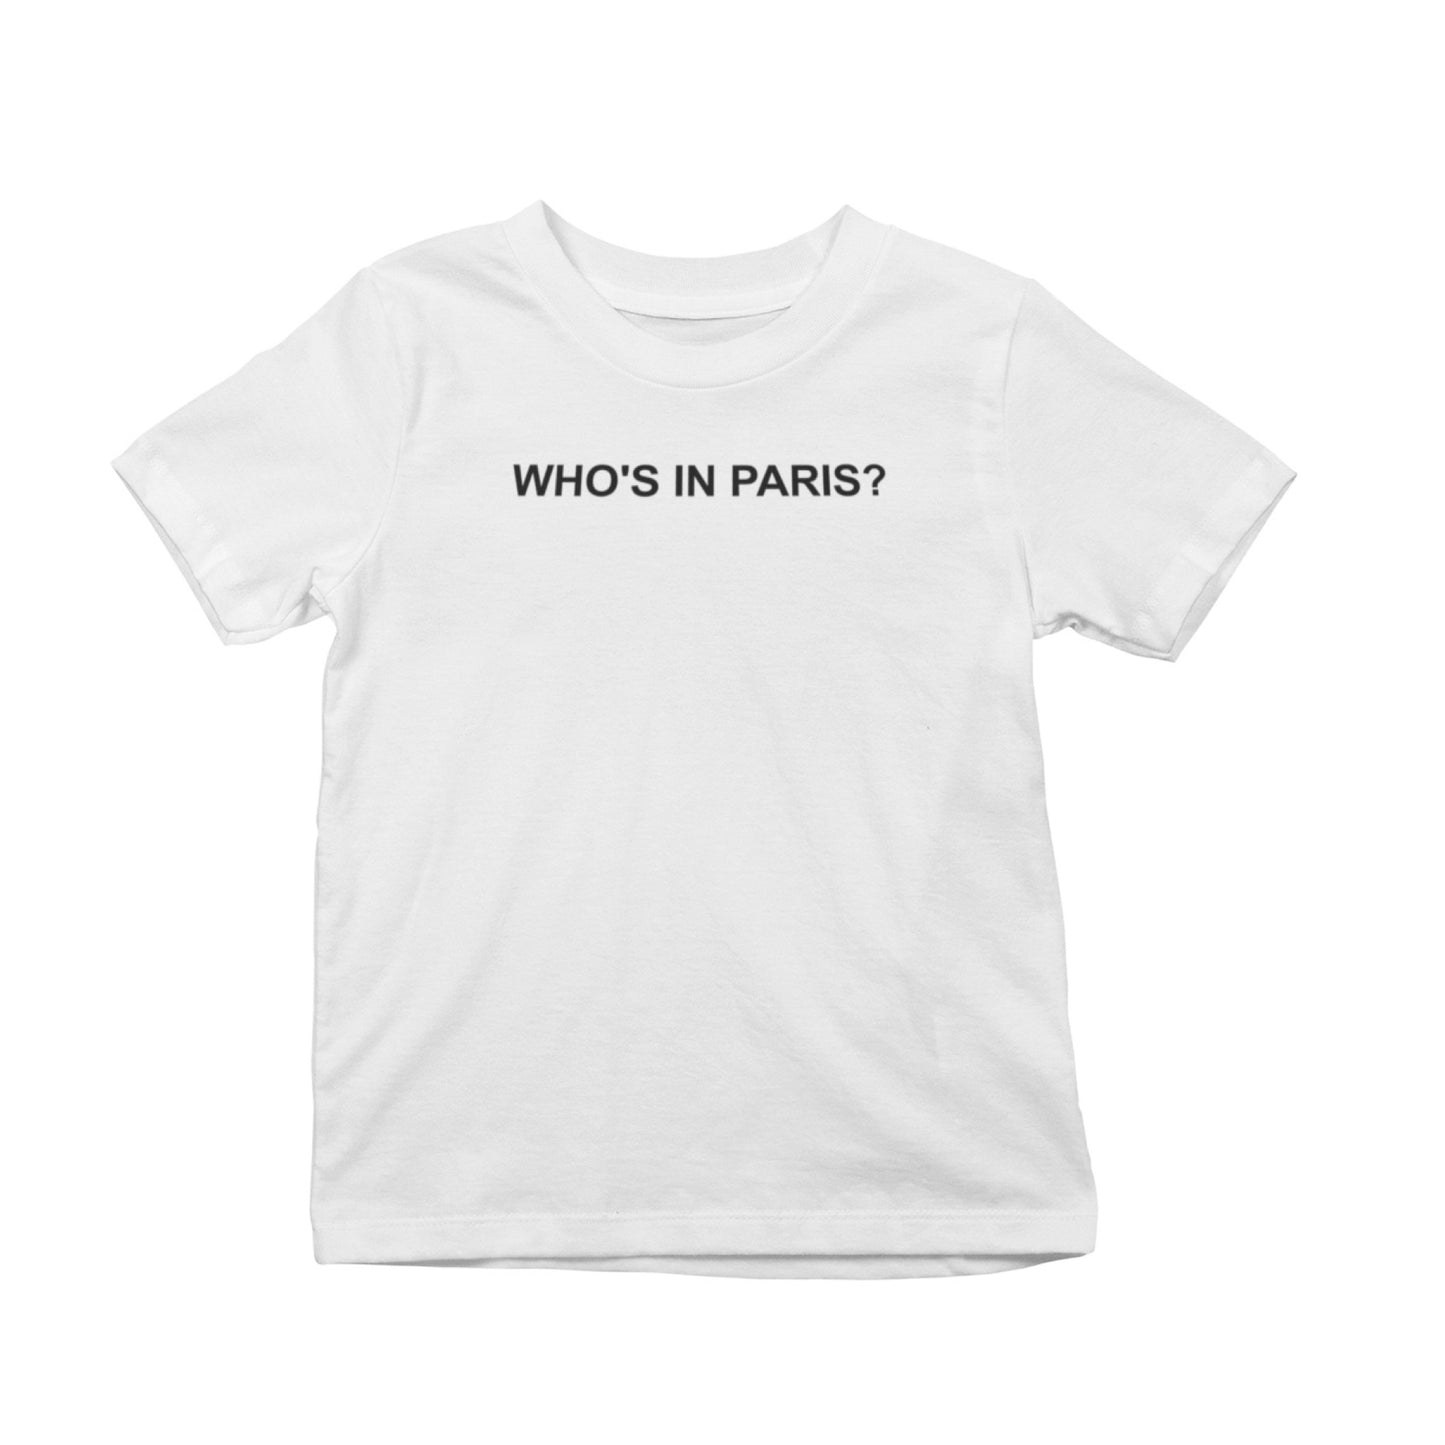 Who's in Paris? T-Shirt